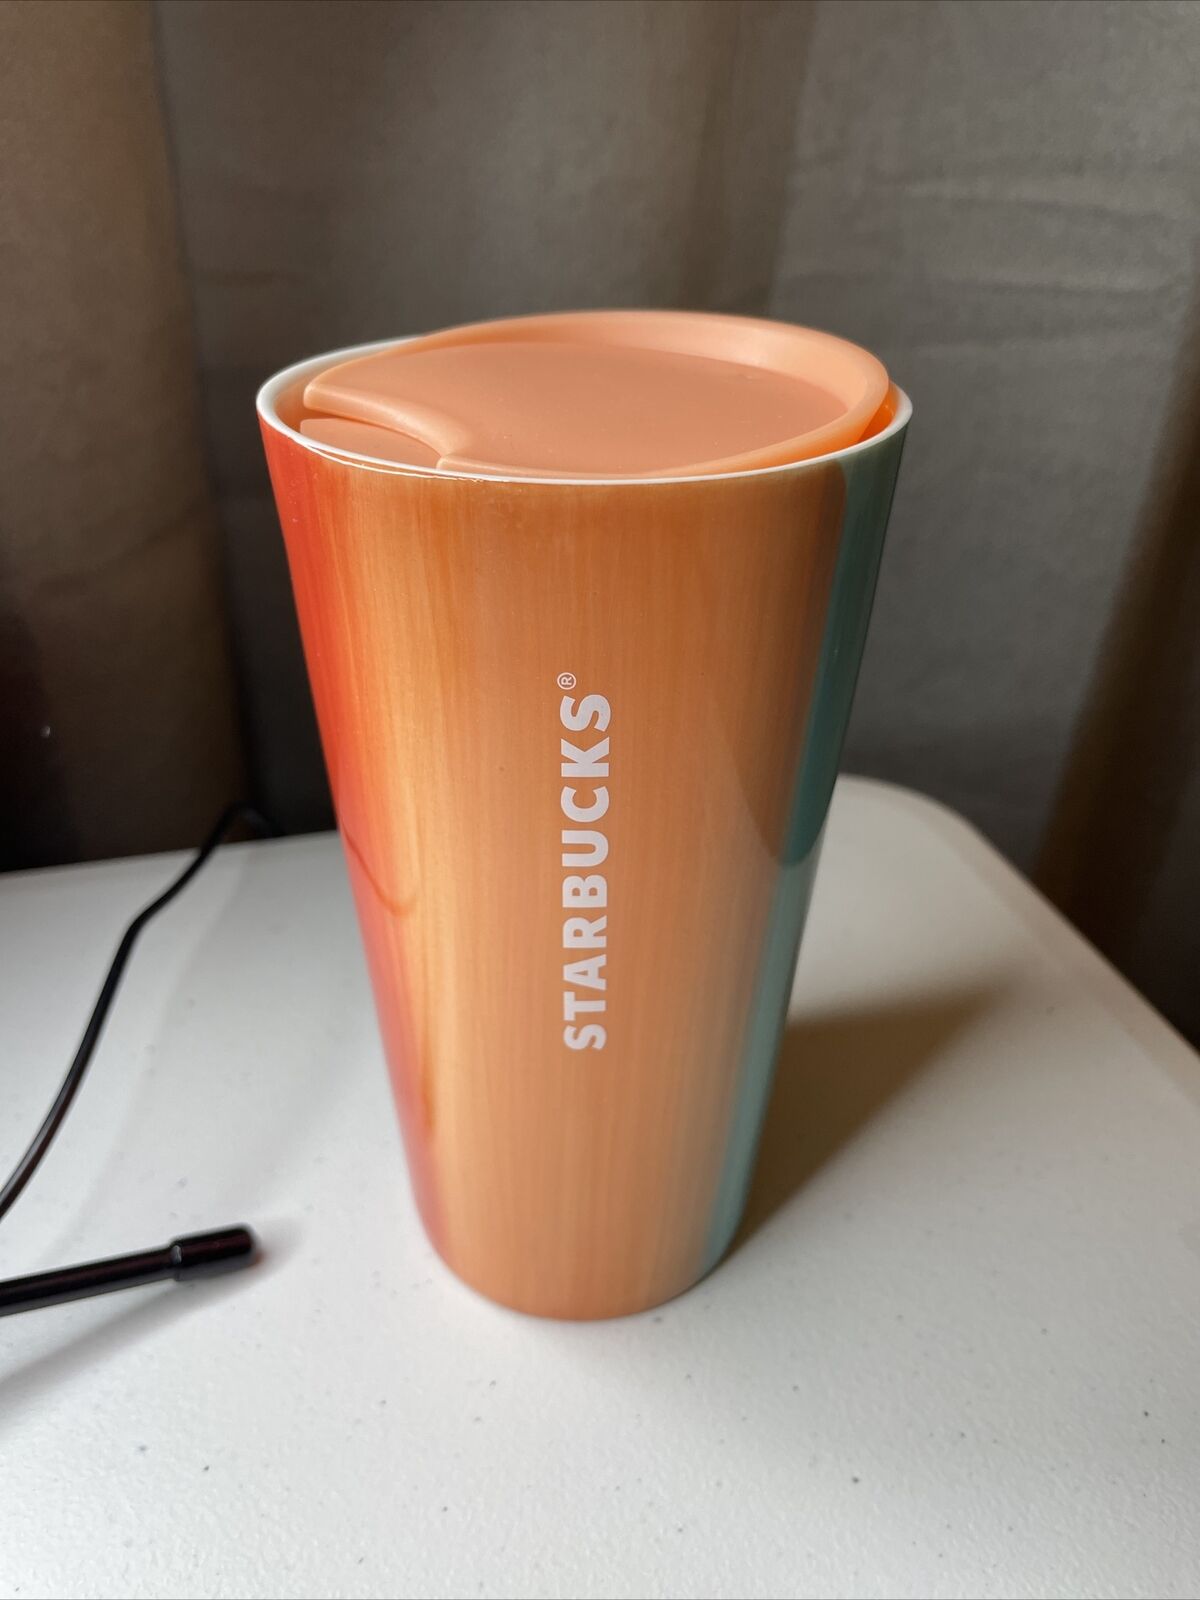 starbucks coffee tumbler 12 oz Vintage With Lid. Orange And Green Used Good Cond